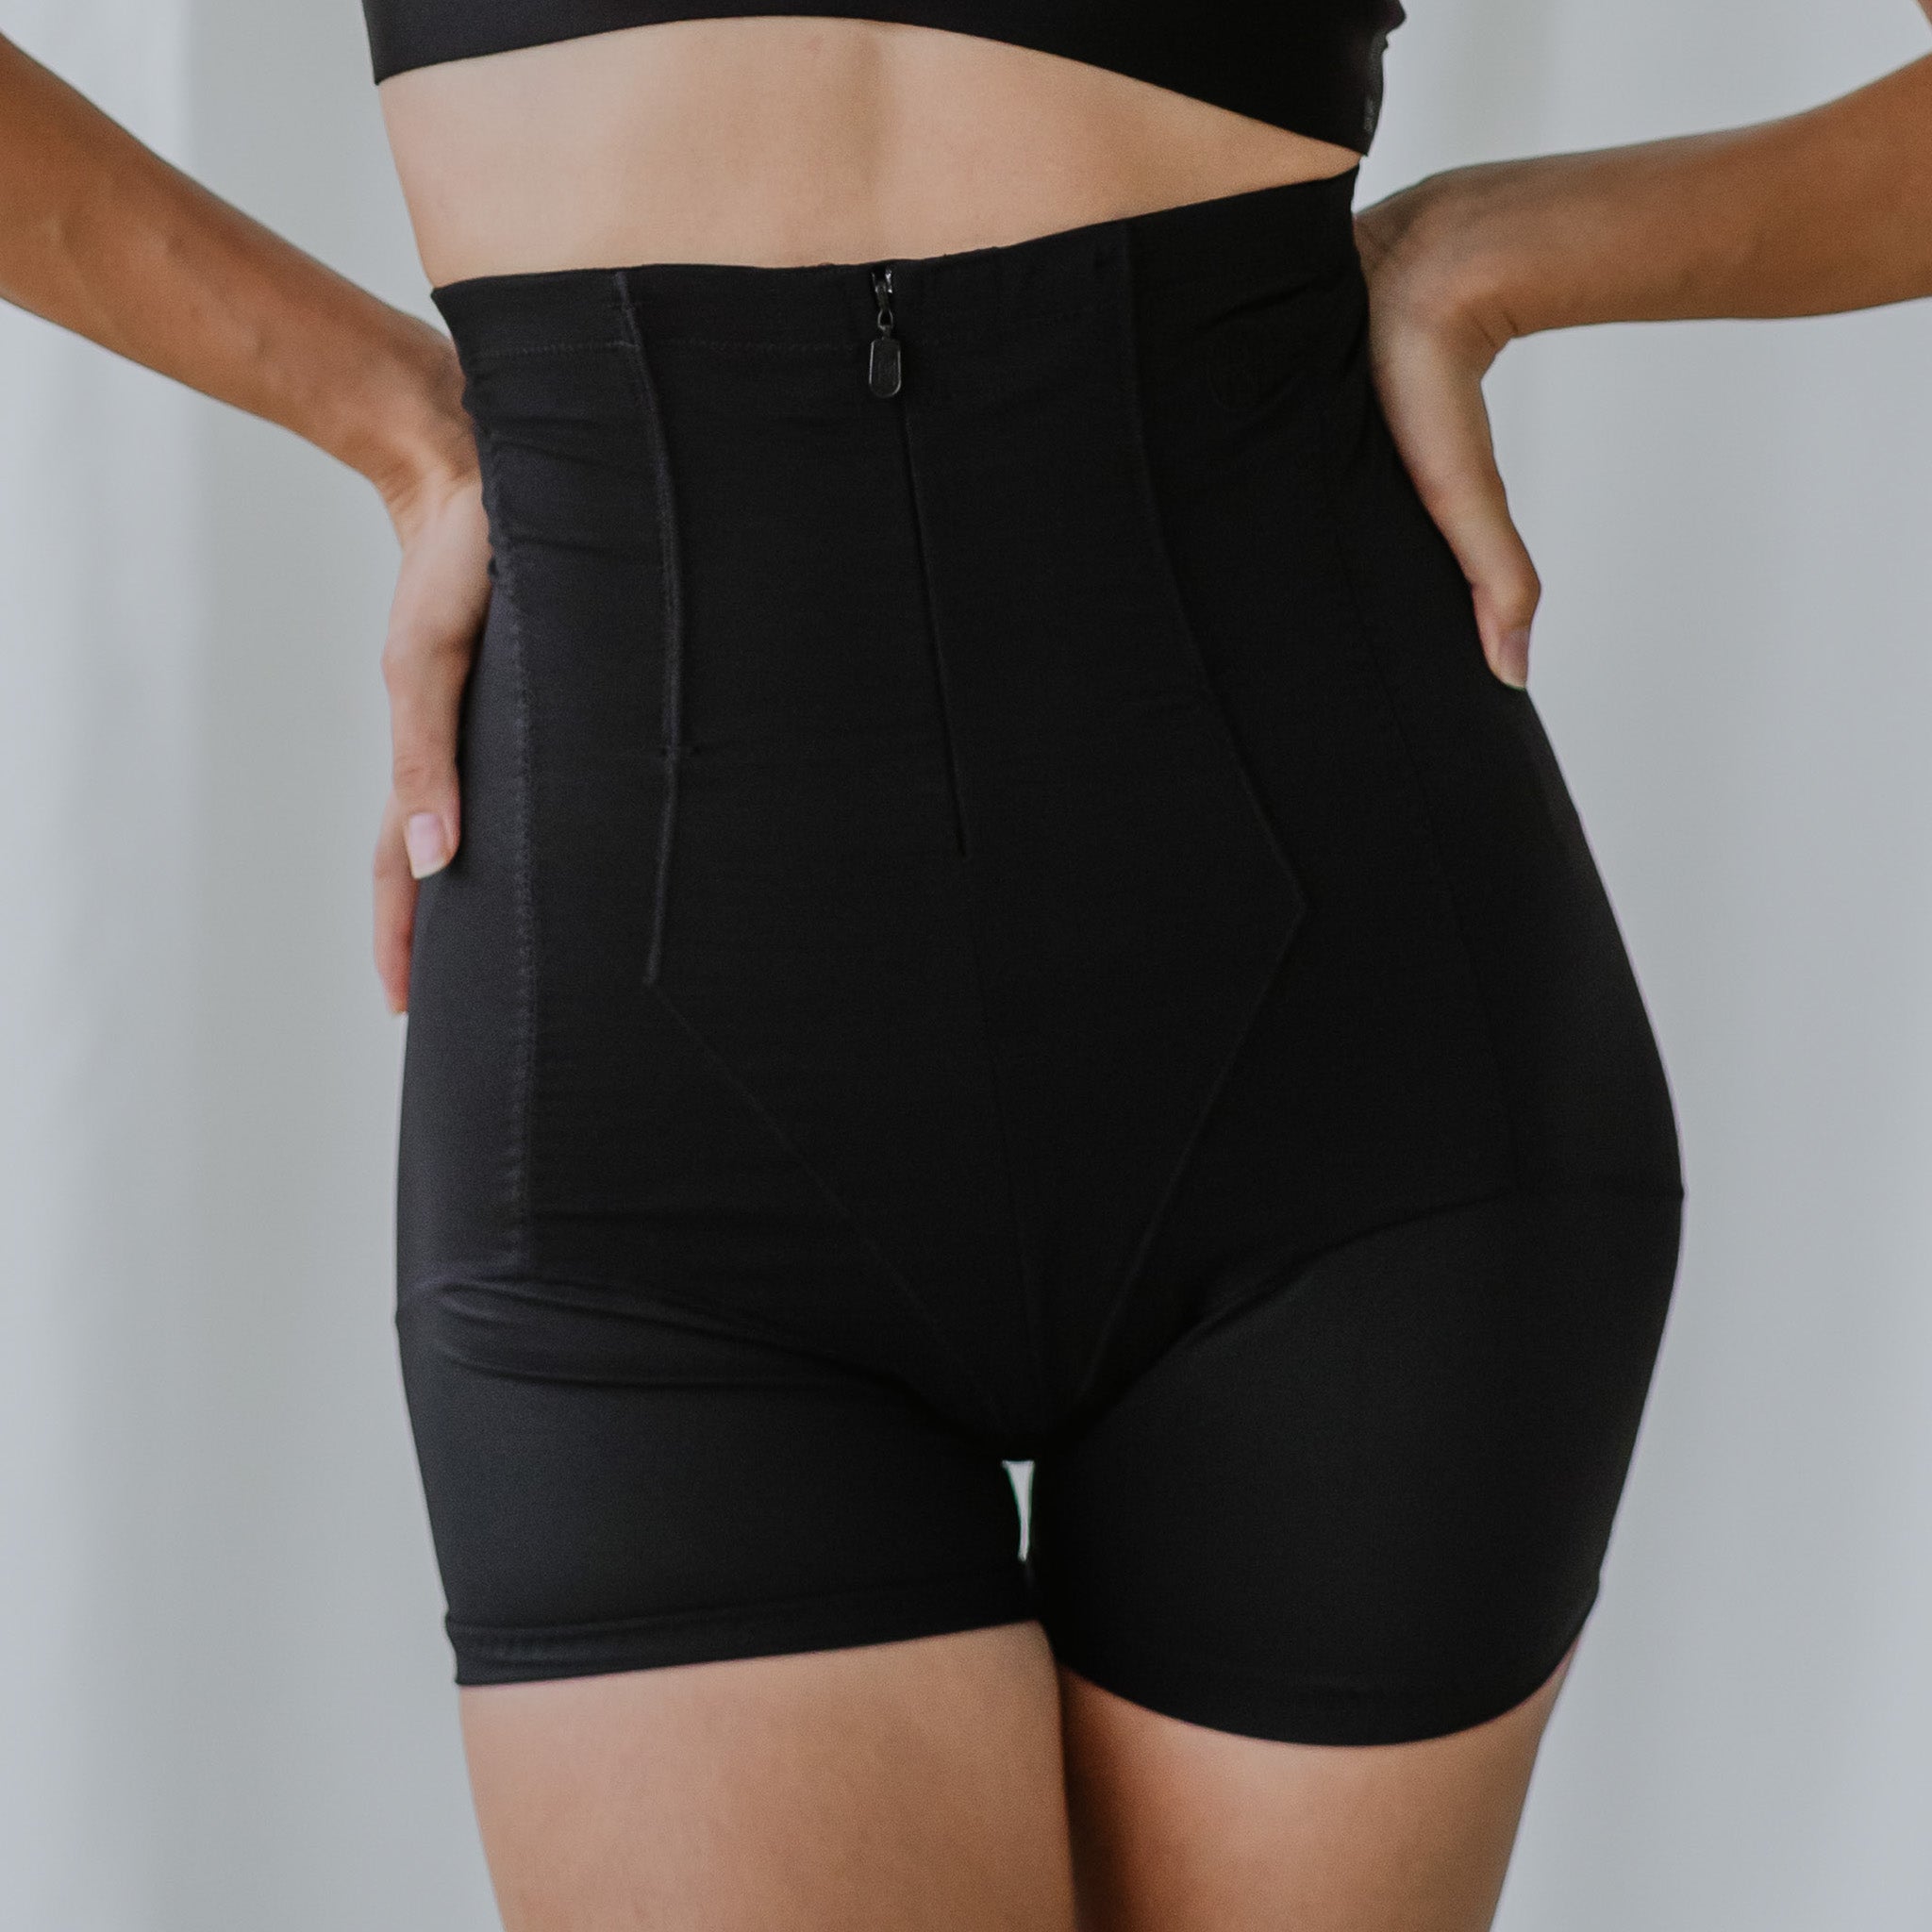 Offer: Empetua All Day Every Day High-Waisted Shaper Boyshort - 70